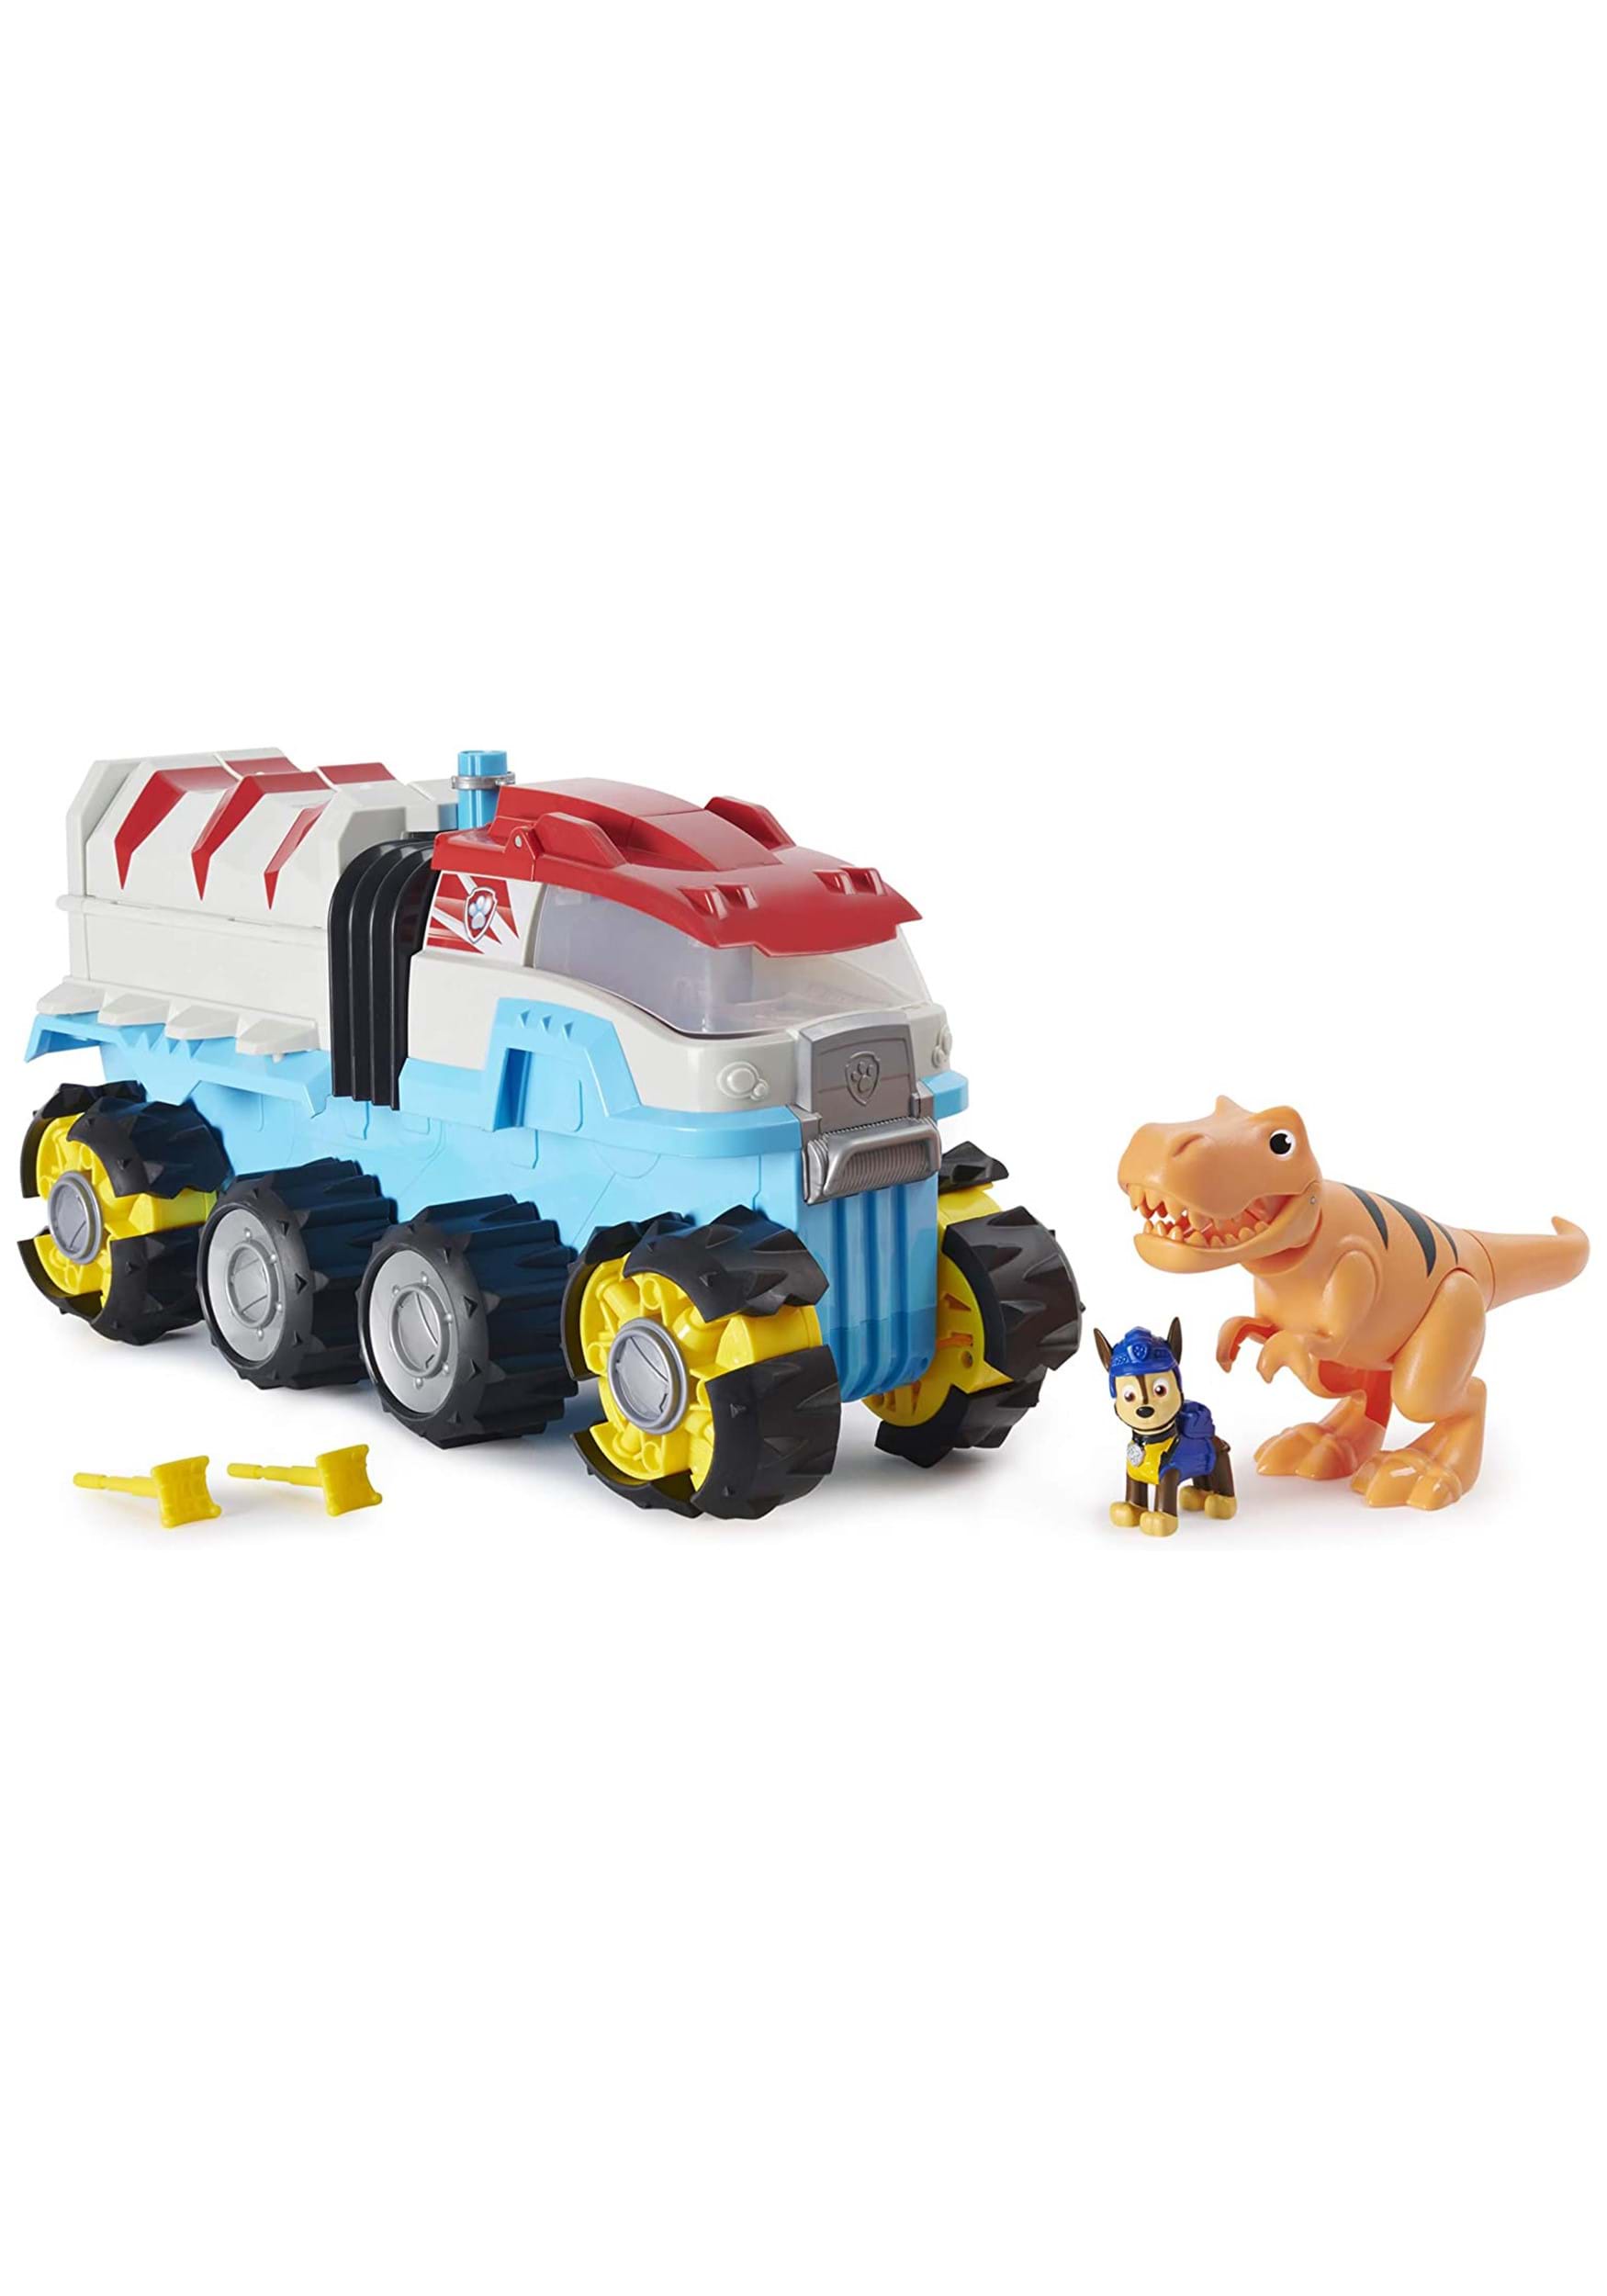 Dino Rescue Patroller Motorized Team Vehicle from Paw Patrol